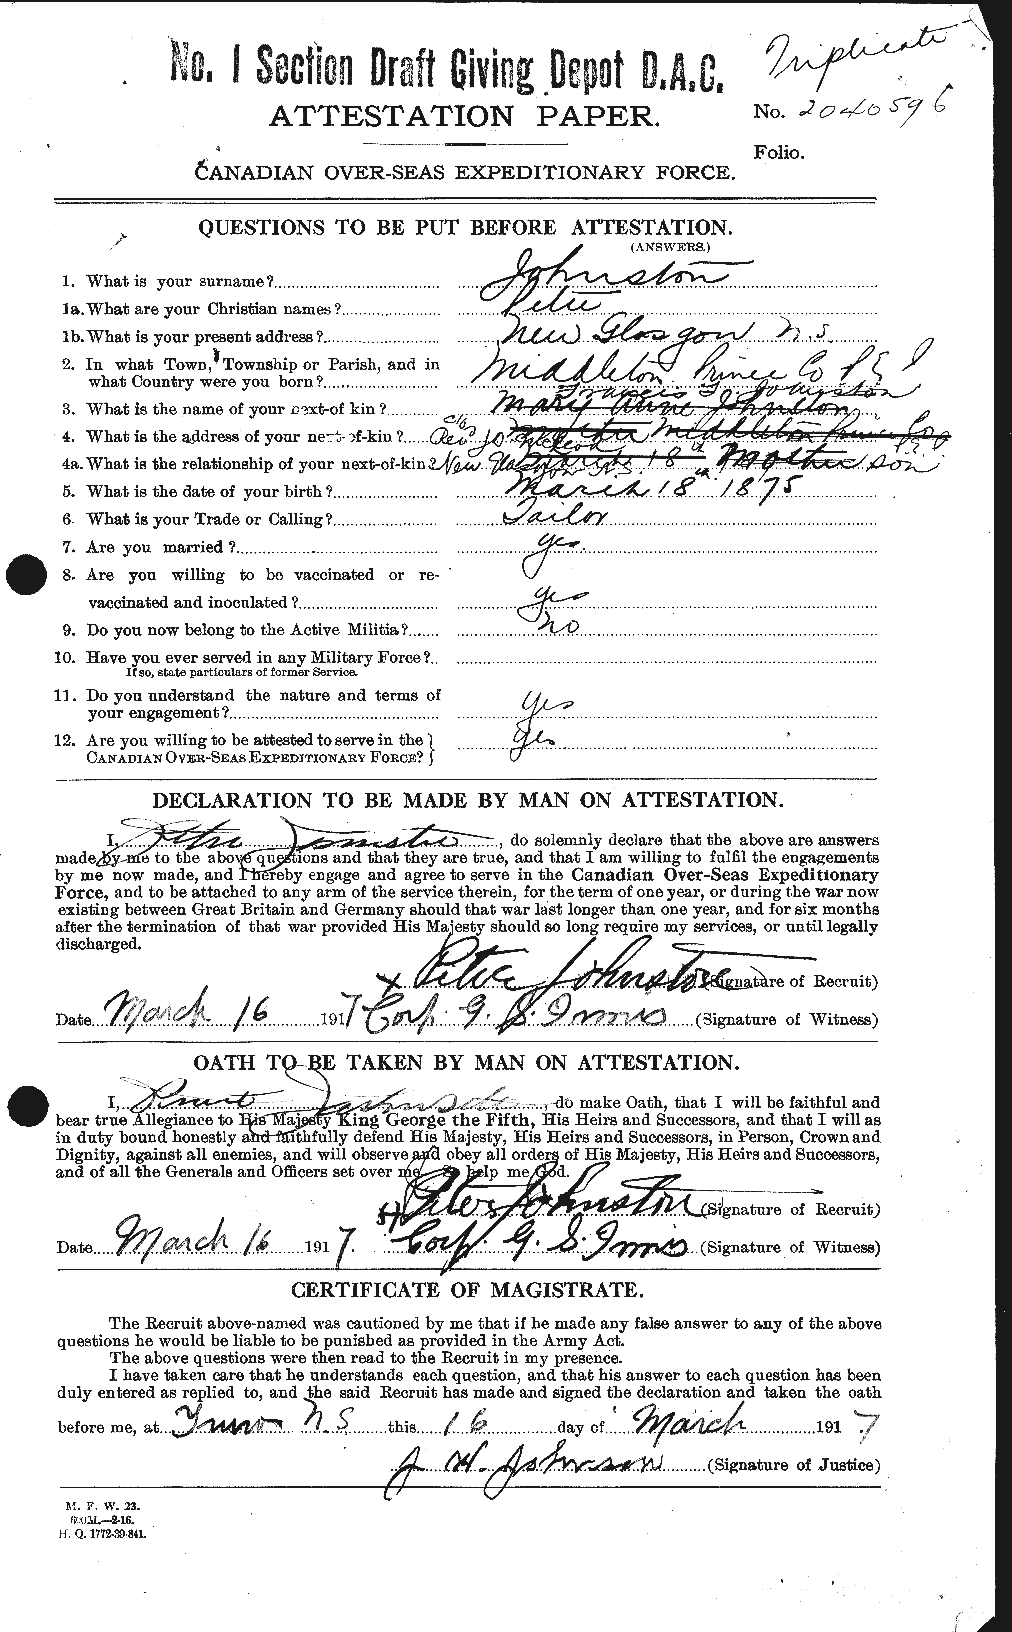 Personnel Records of the First World War - CEF 423042a